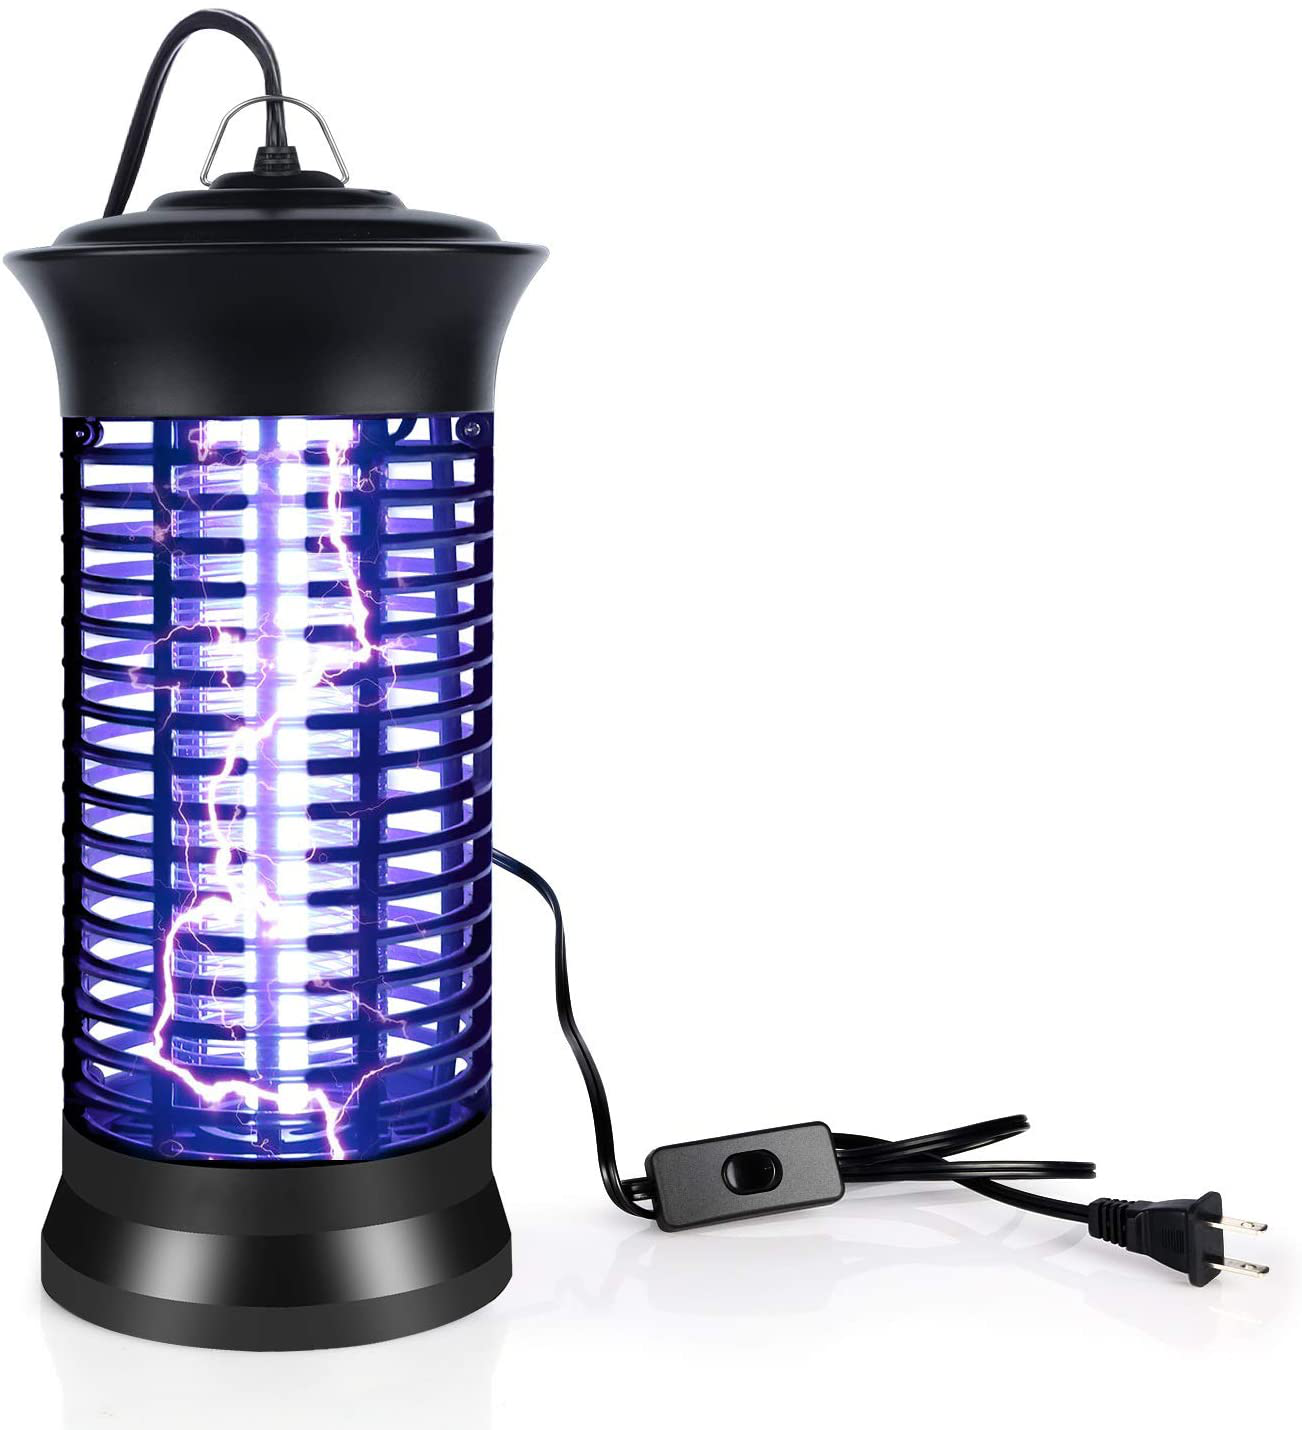 Indoor Bug Zapper with Switch, Electric Mosquito Killer Lamp with UV Light, Portable Standing or Hanging Home Bug Killer for Kitchen and Office